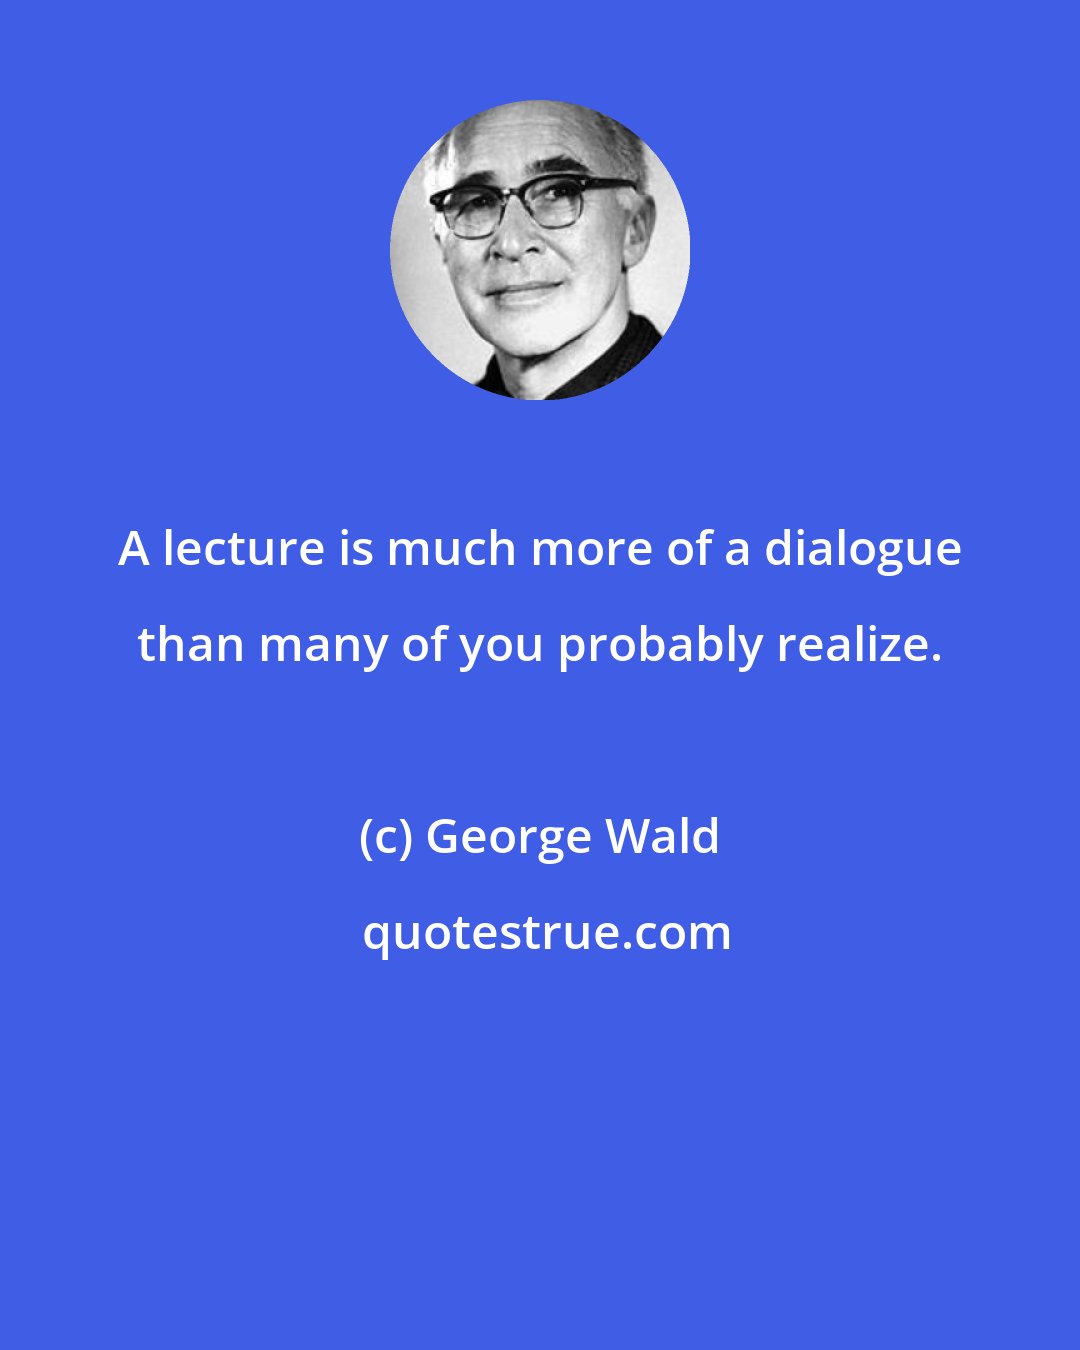 George Wald: A lecture is much more of a dialogue than many of you probably realize.